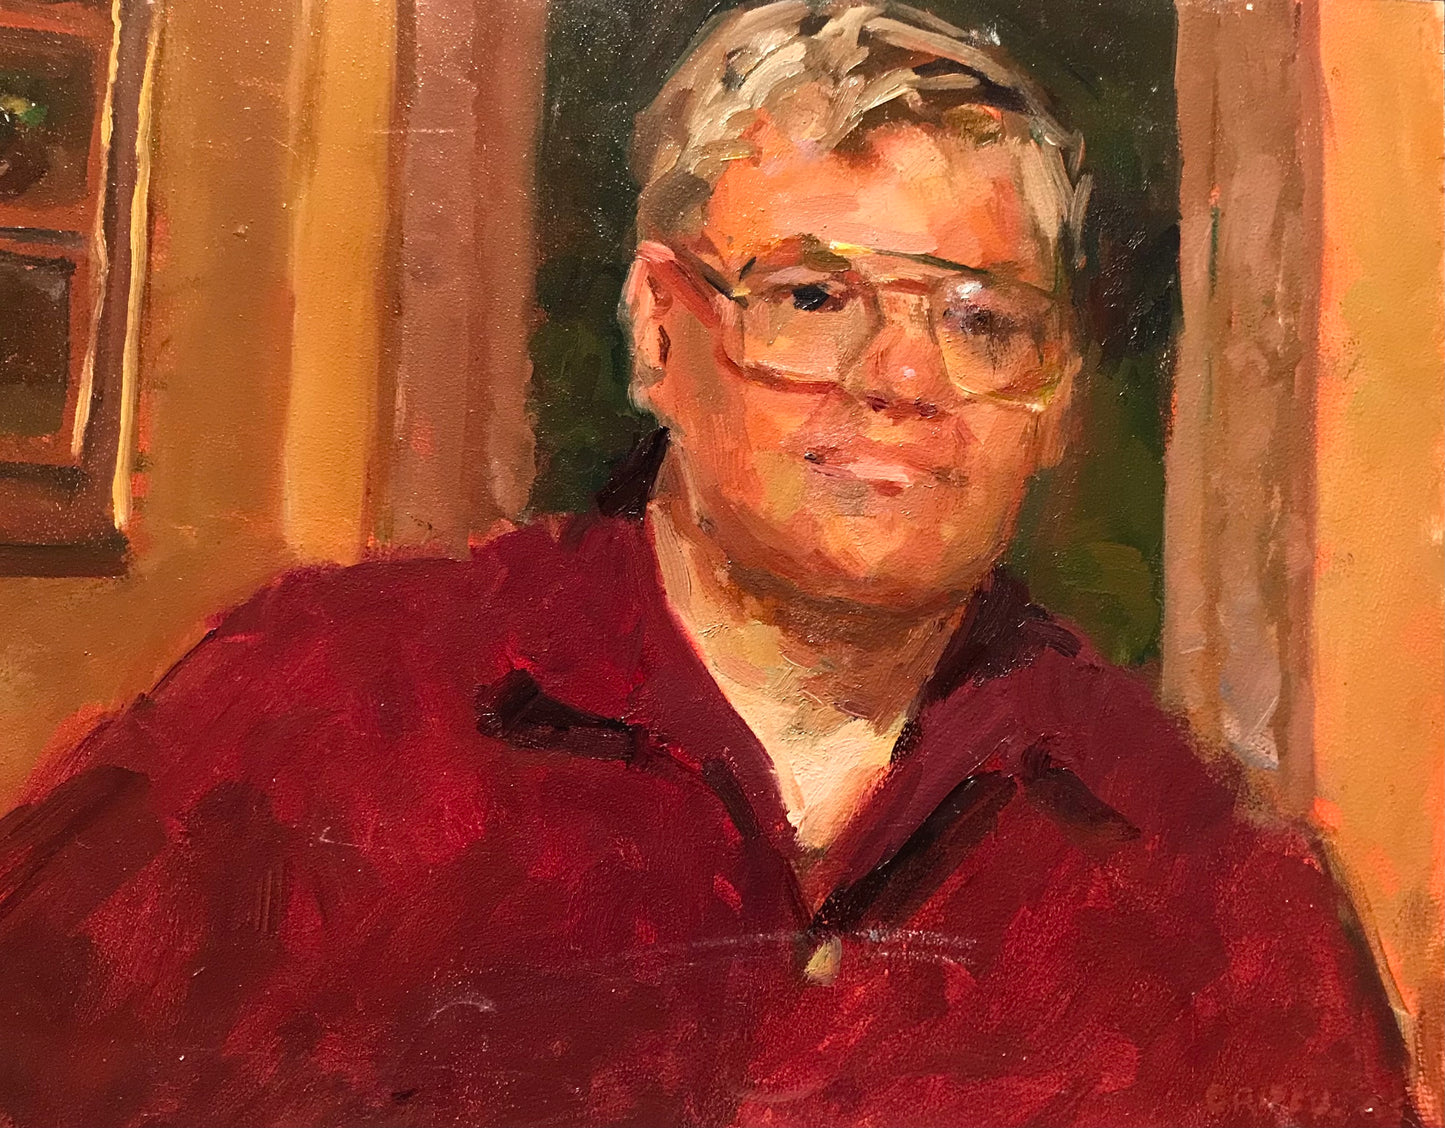 Bill in Red Shirt (12 x 18 Inches)